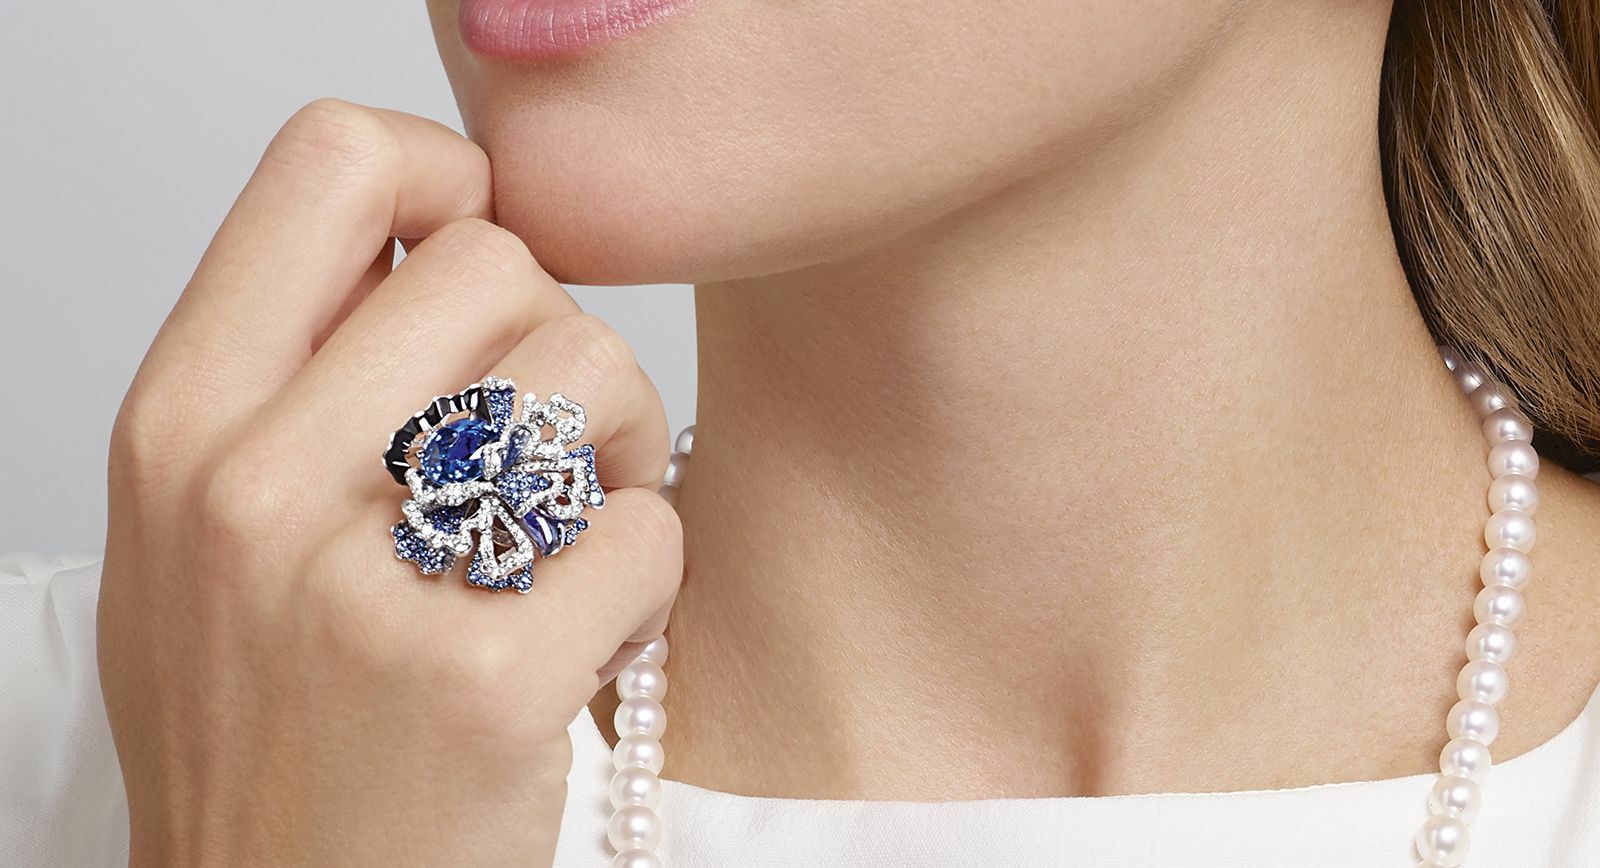 Chaumet in Bloom Esquisse de Chaumet ring in white gold, set with a Sri Lankan 6.05 carat oval-cut sapphire, onyx, tanzanite and brilliant-cut diamonds